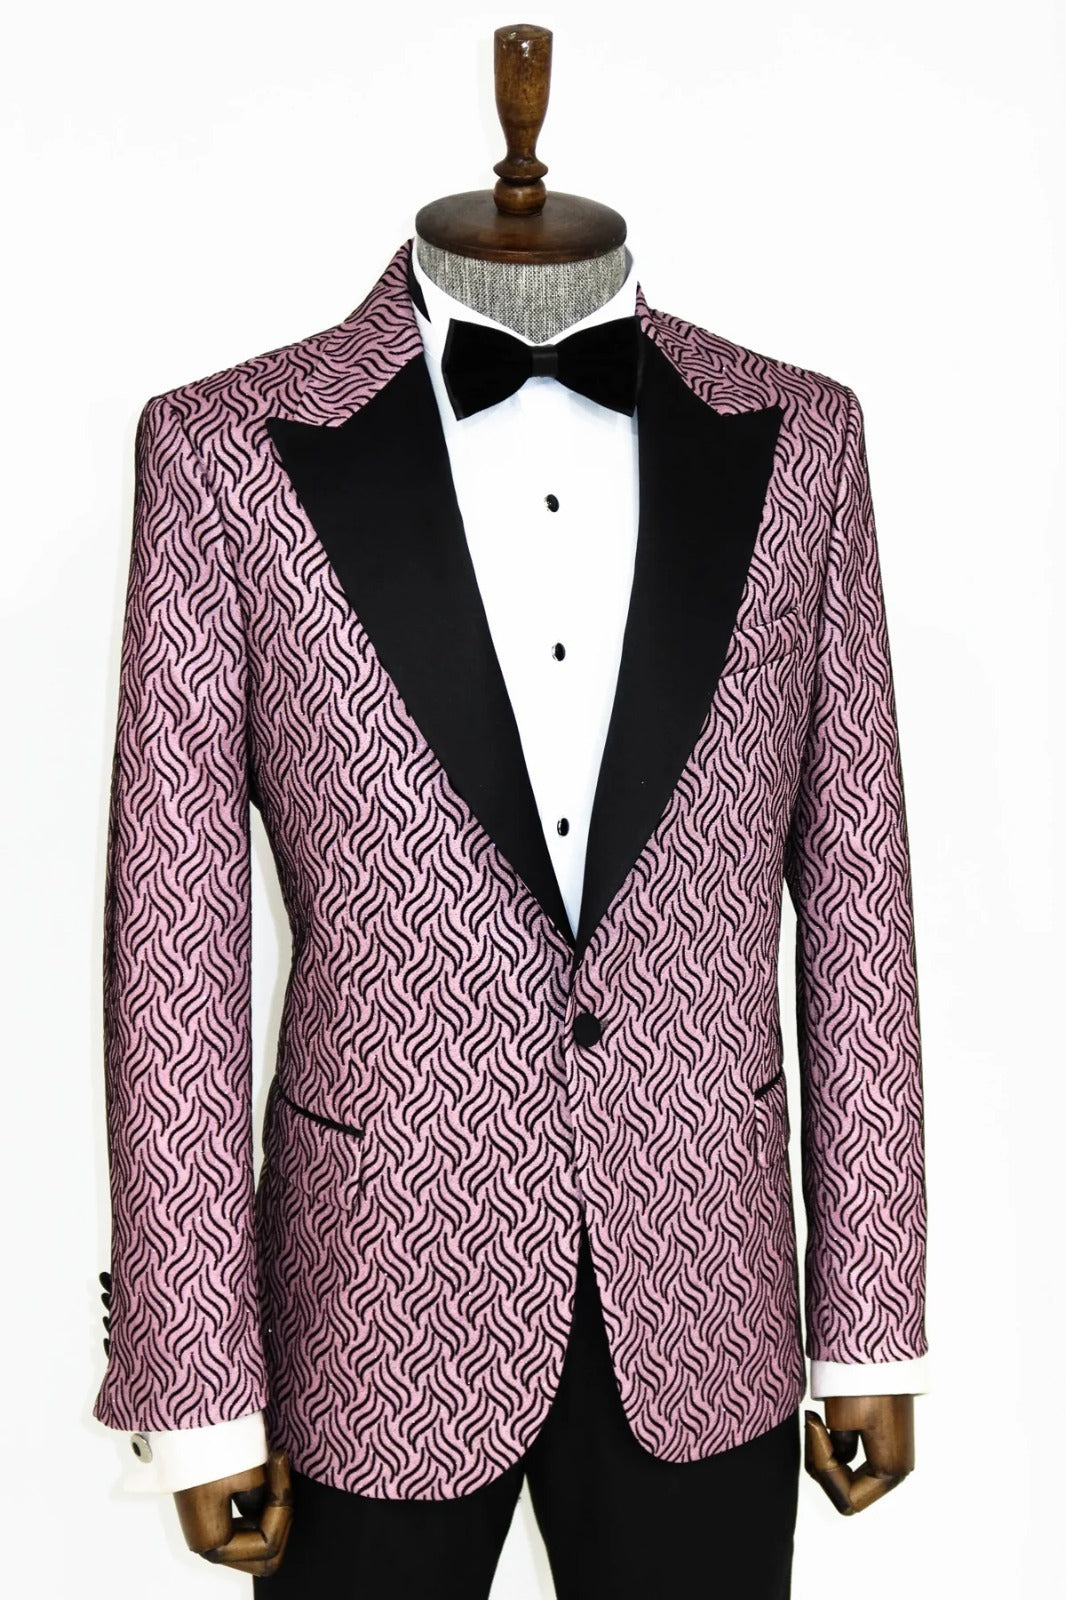 Man wearing a stylish Pink and Black Sparkle Blazer by KCT Menswear, showcasing elegance and sophistication in formal wear.